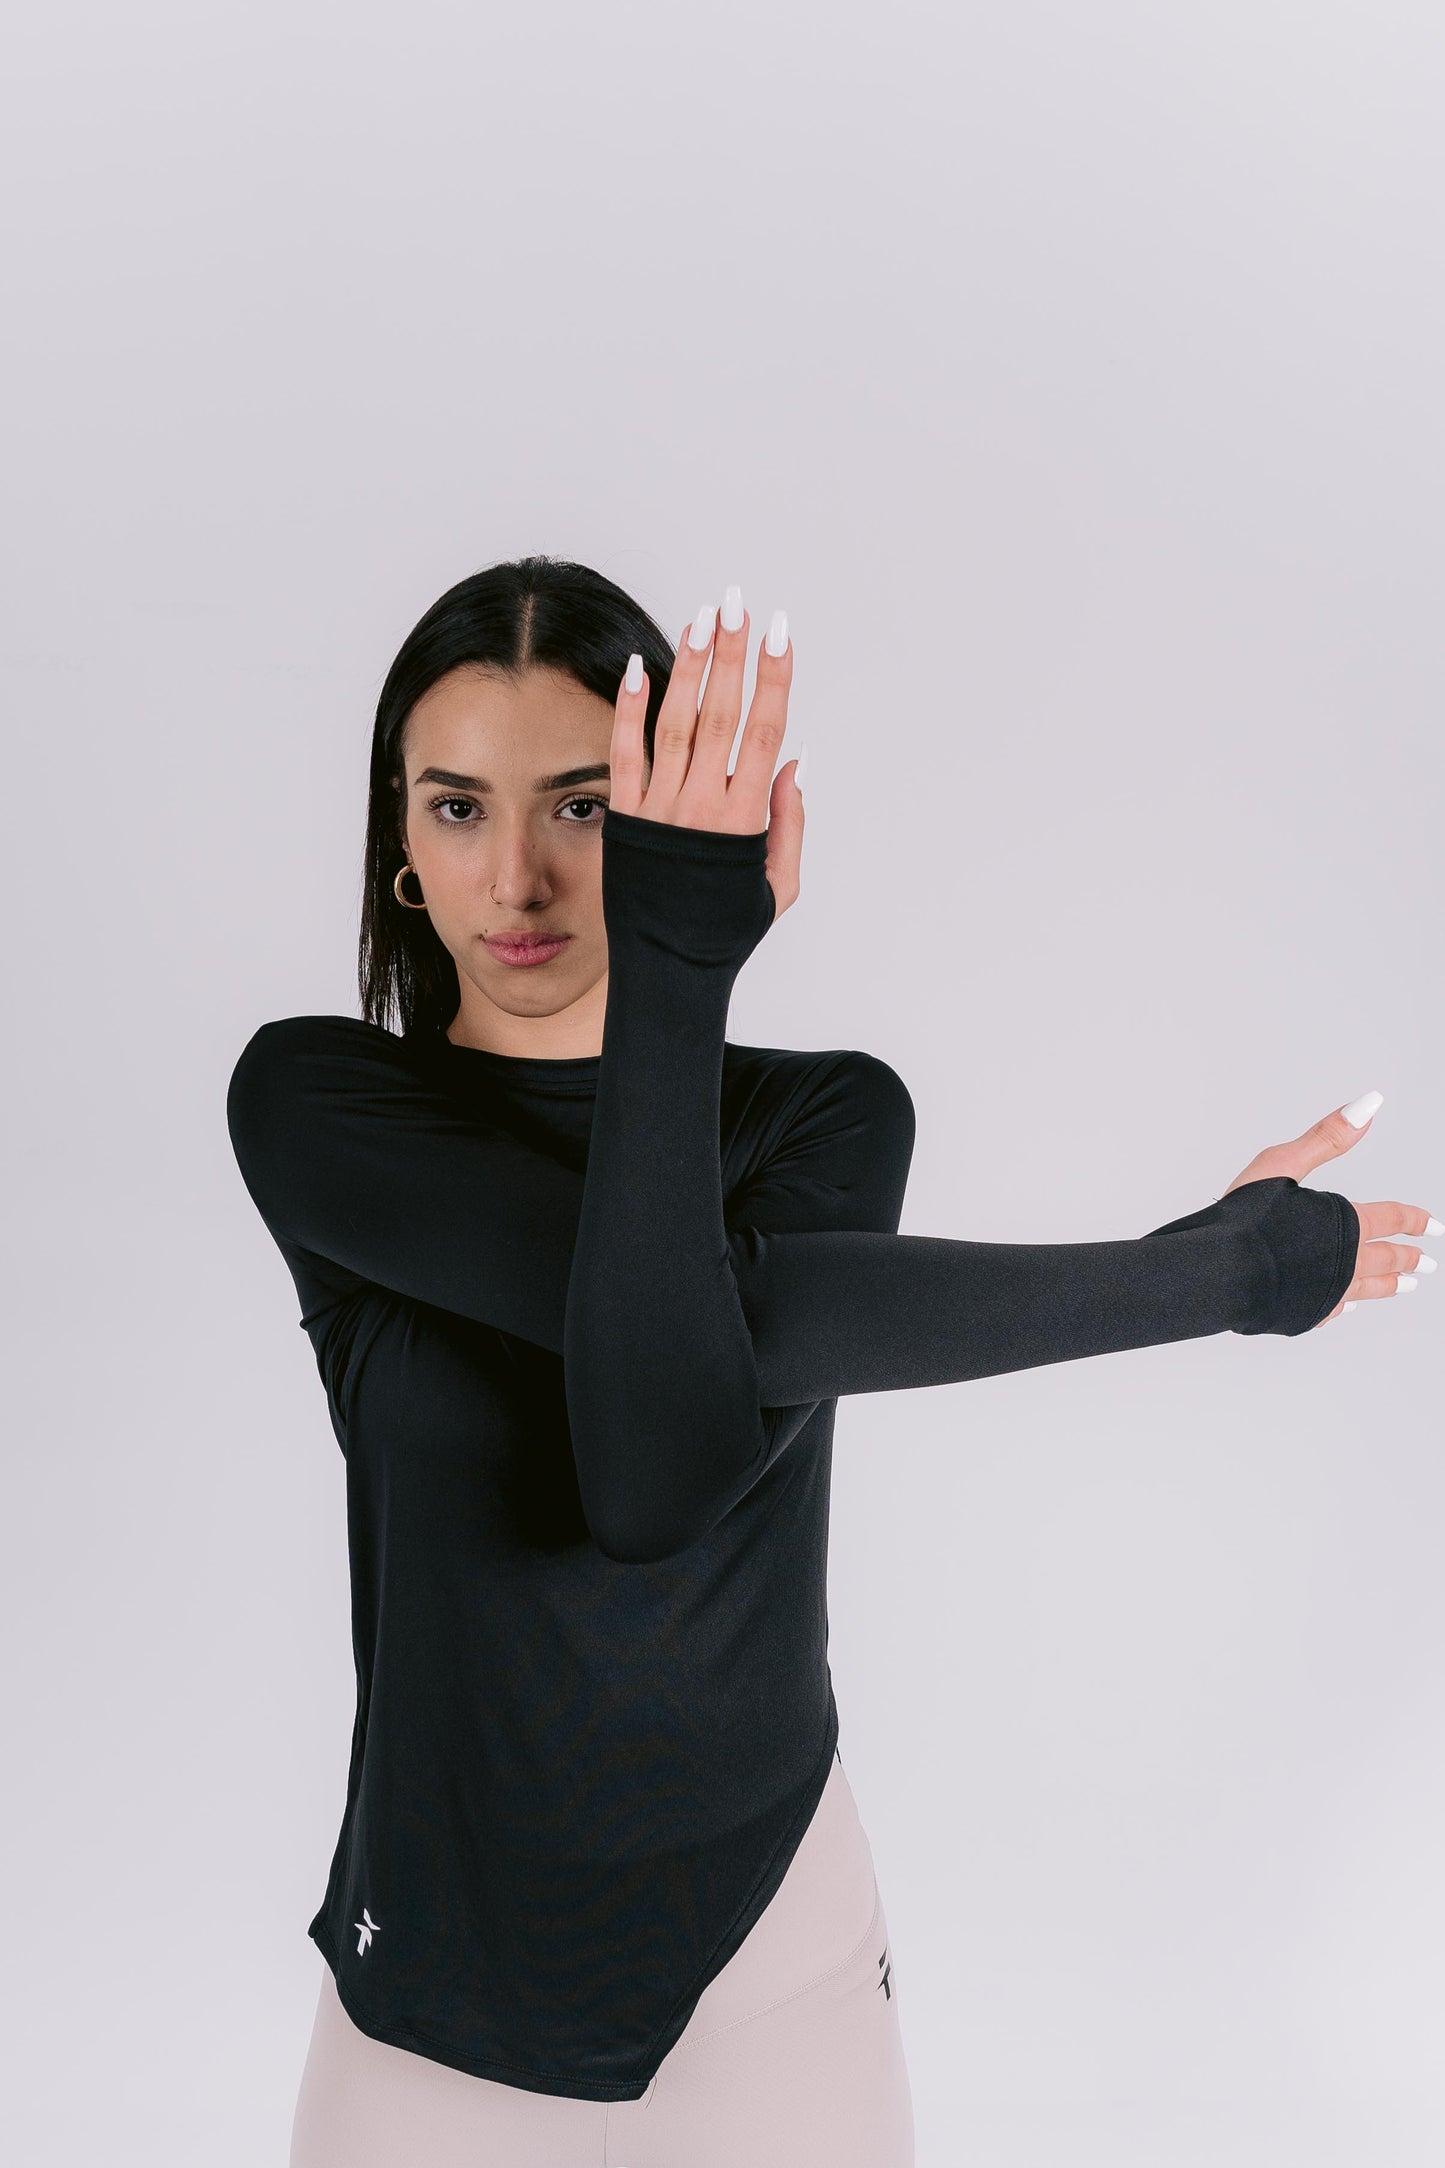 HOME TOWN ESSENTIAL LONG SLEEVE TOP - Black - FIT TRIBE